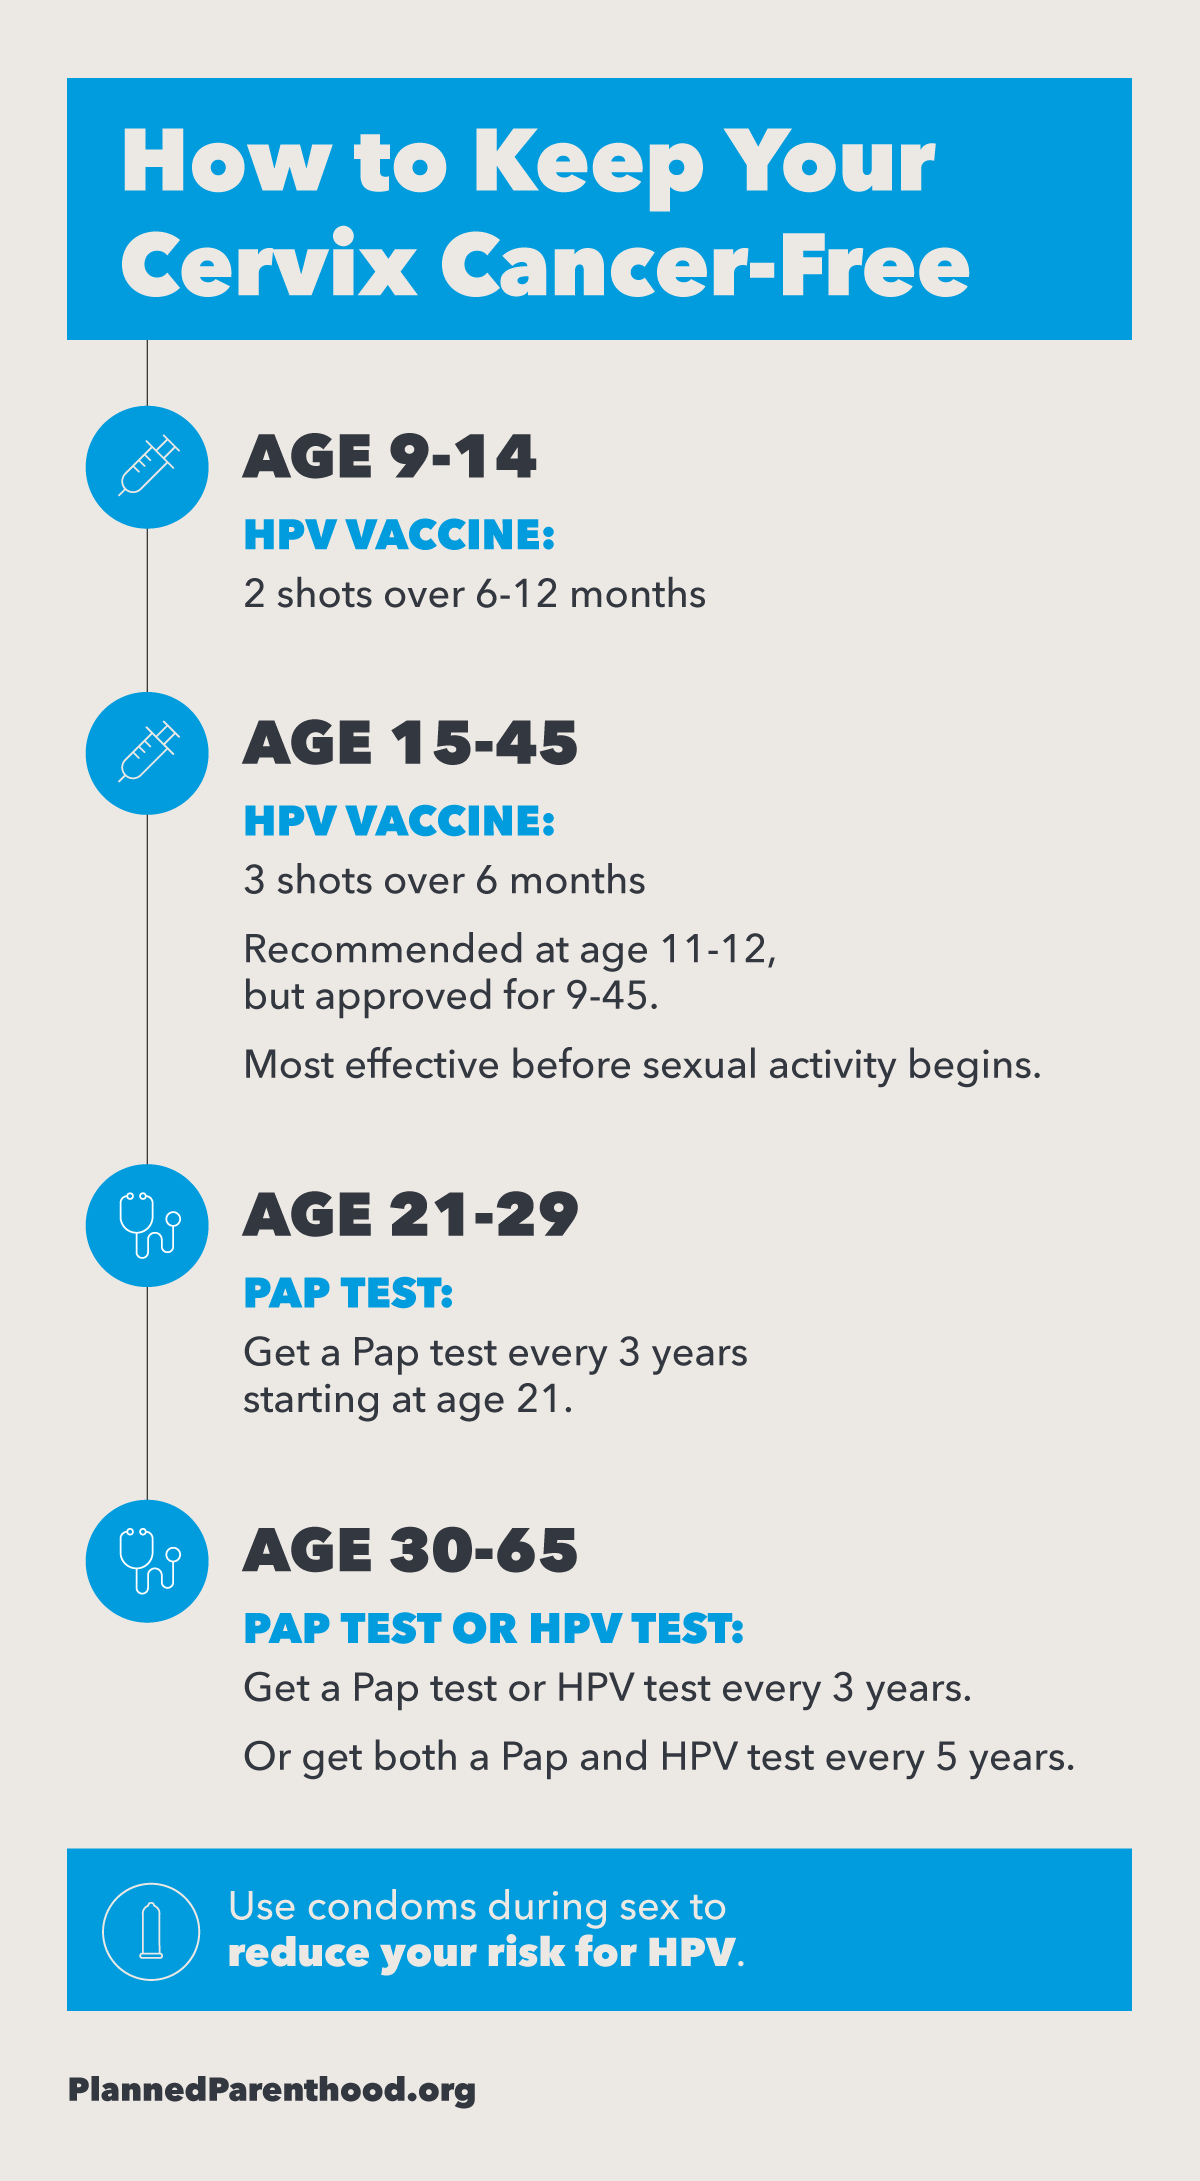 Can hpv high risk go away - Does hpv high risk go away